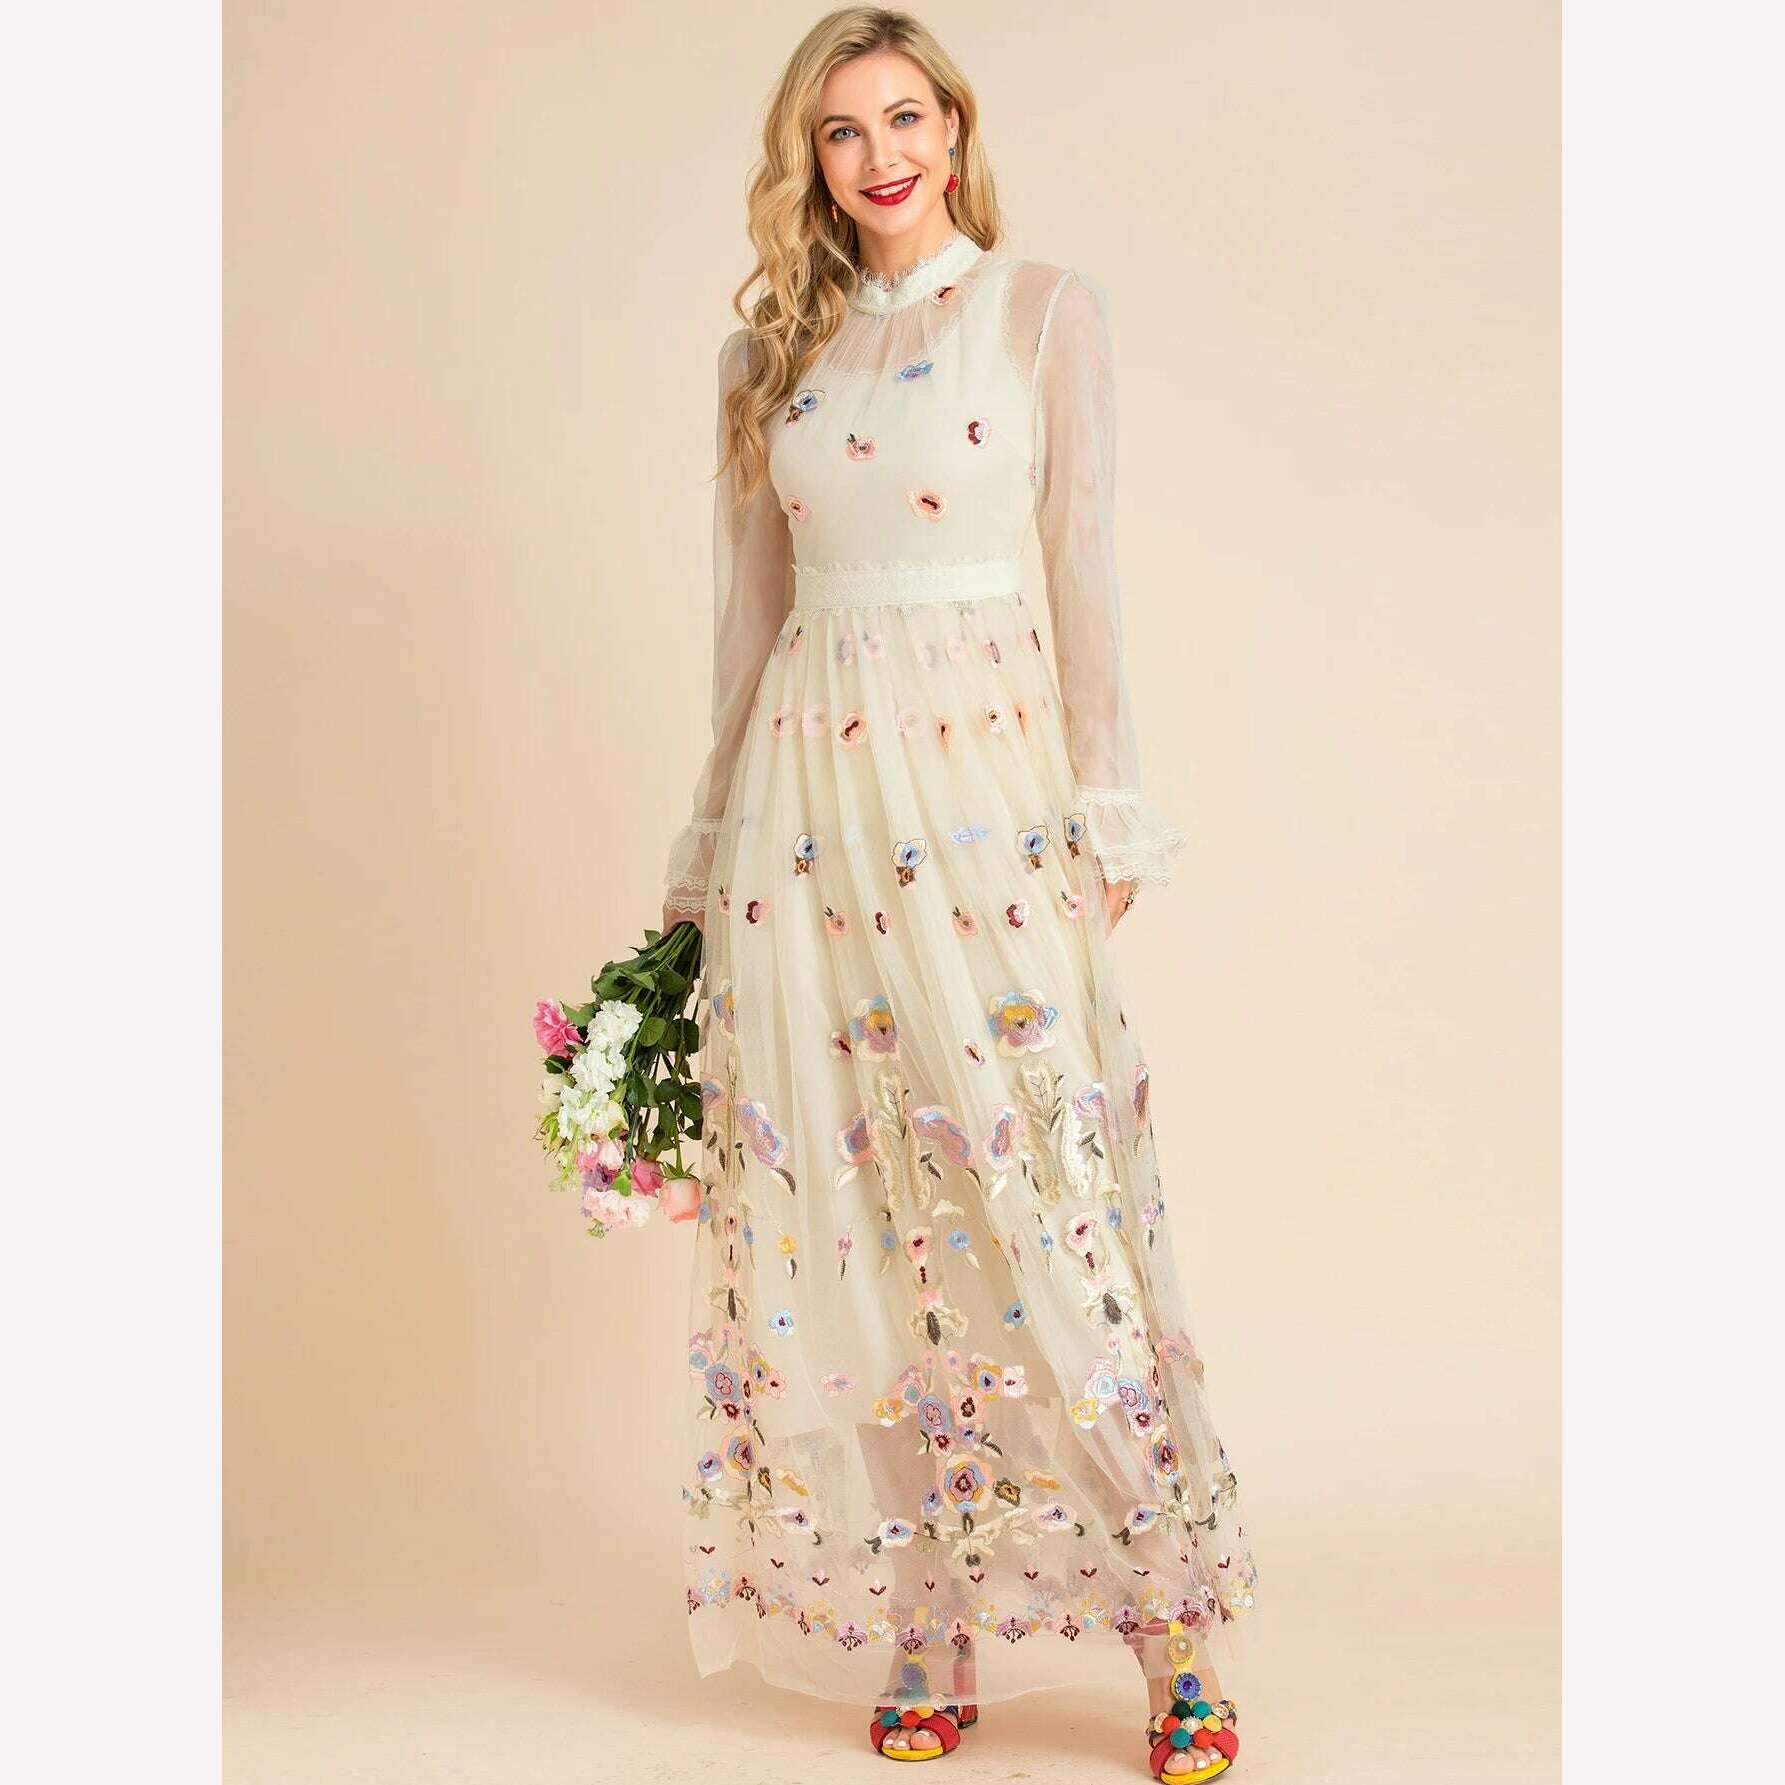 KIMLUD, LD LINDA DELLA 2022 Summer Runway Maxi Vintage Party Dress Women's Stand collar Flare Sleeve Mesh Flowers Embroidery Long Dress, KIMLUD Women's Clothes